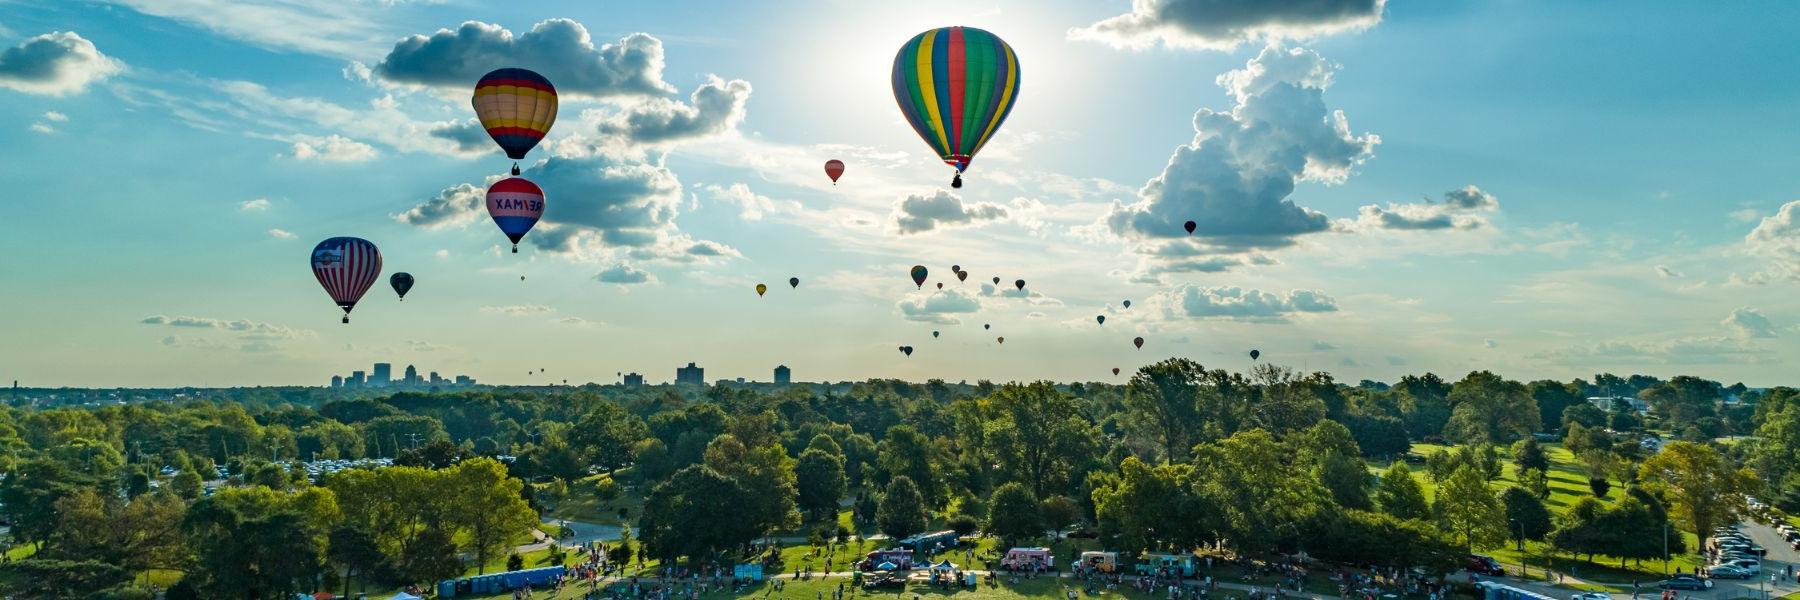 The Great Forest Park Balloon Race is one of St. Louis' signature events.